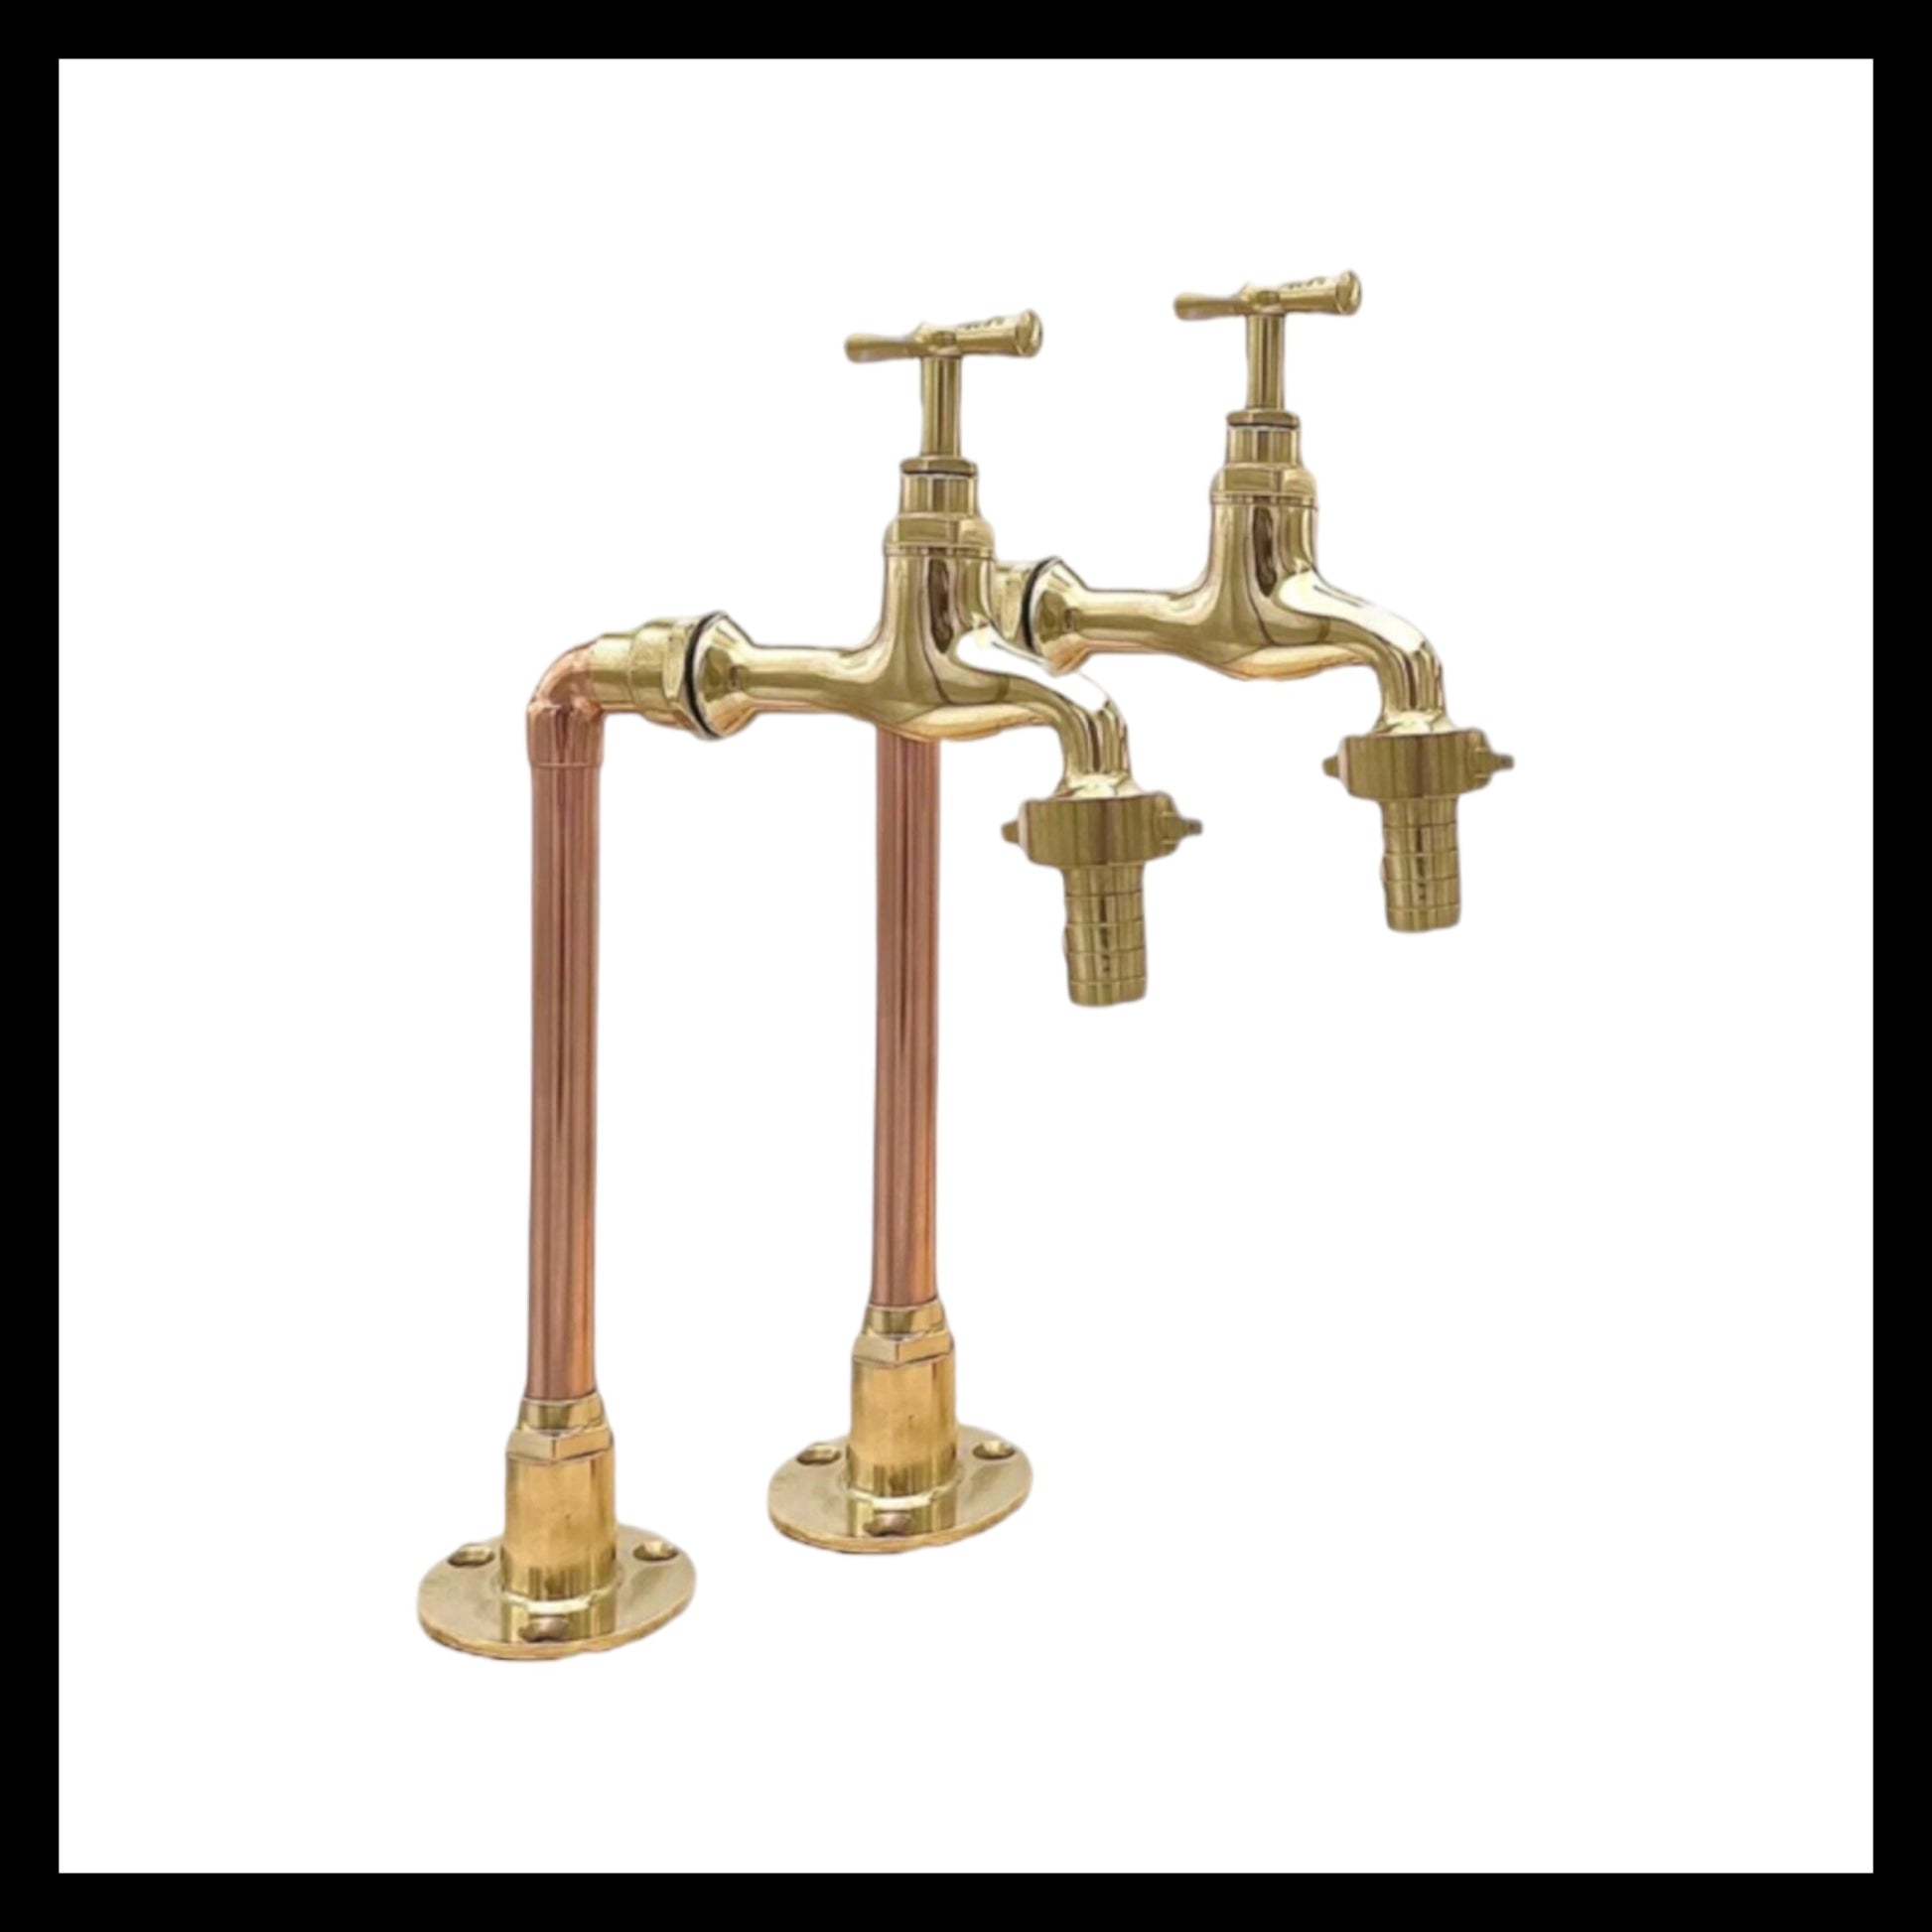 image handmade copper and brass taps sold by All Things French Store